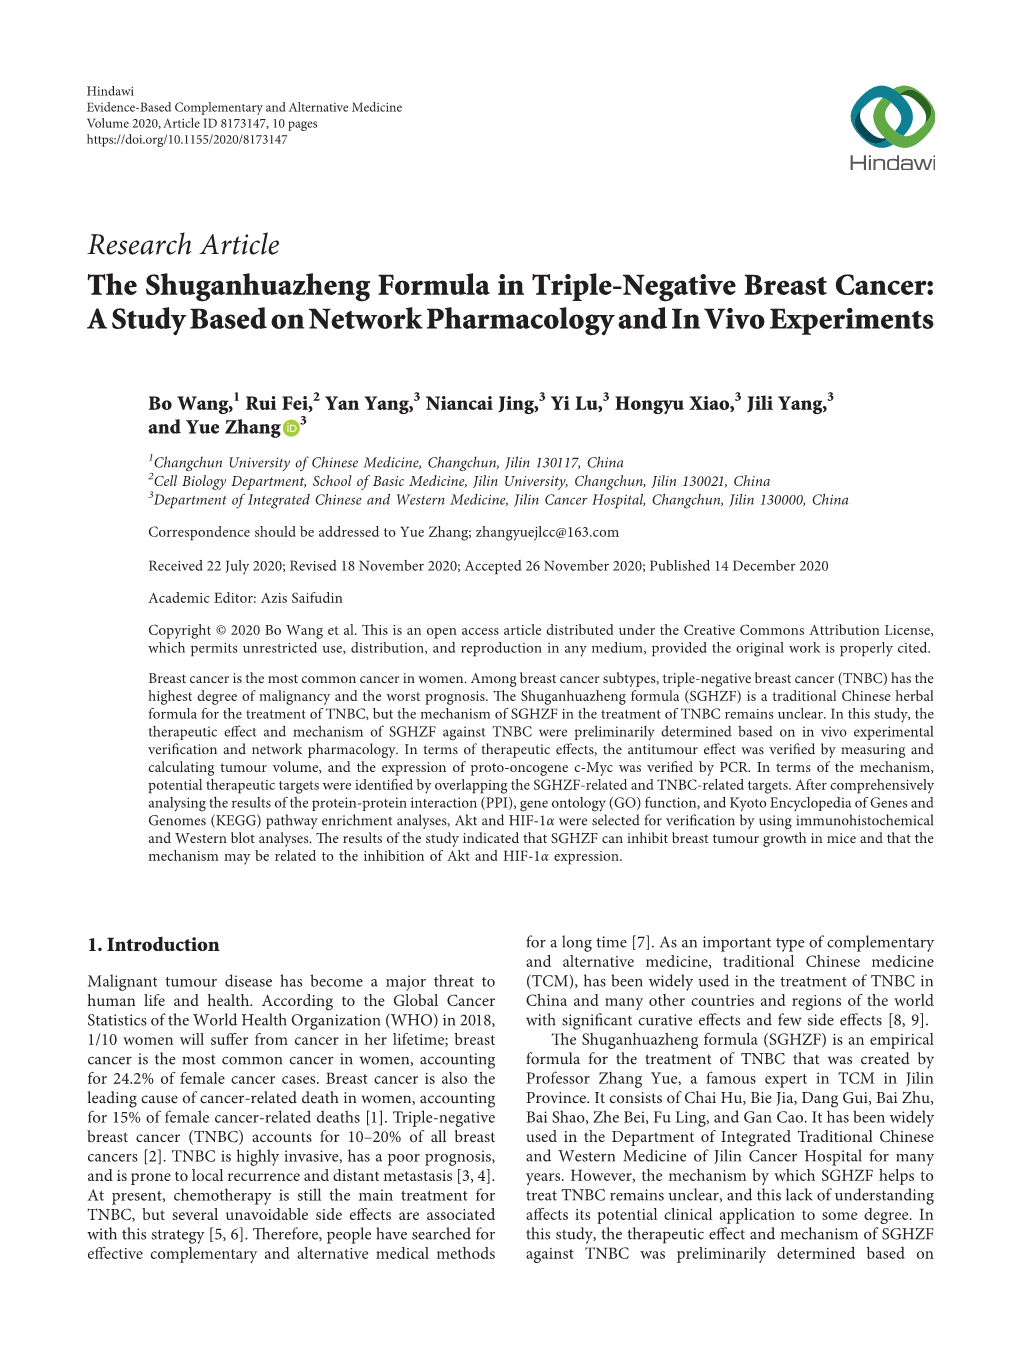 The Shuganhuazheng Formula in Triple-Negative Breast Cancer: a Study Based on Network Pharmacology and in Vivo Experiments